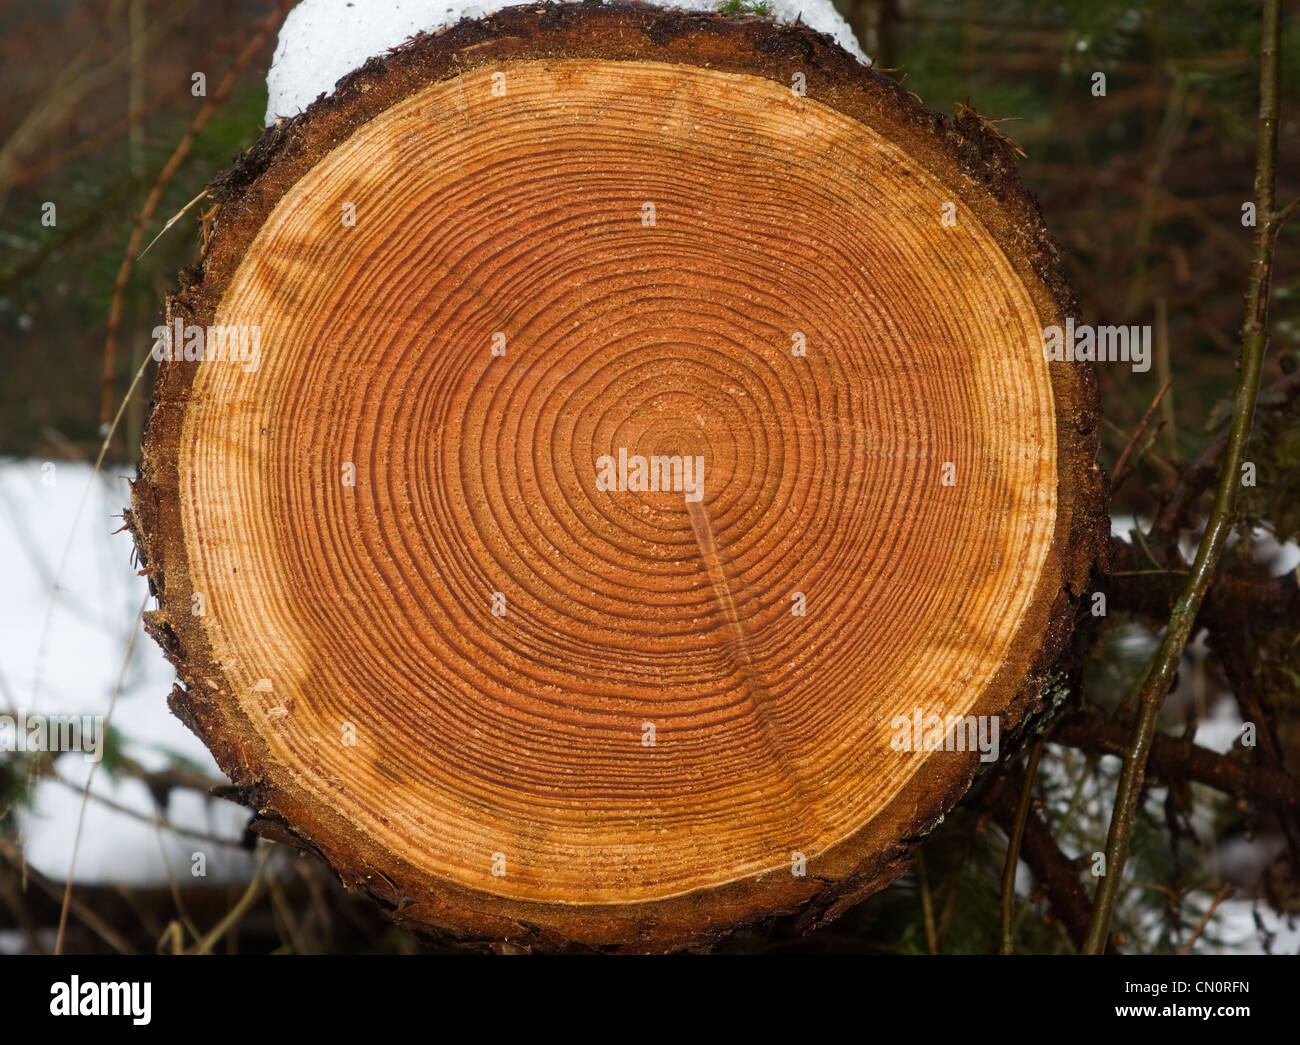 Fun Things To Learn About Tree Rings with Kids! - Our Days Outside